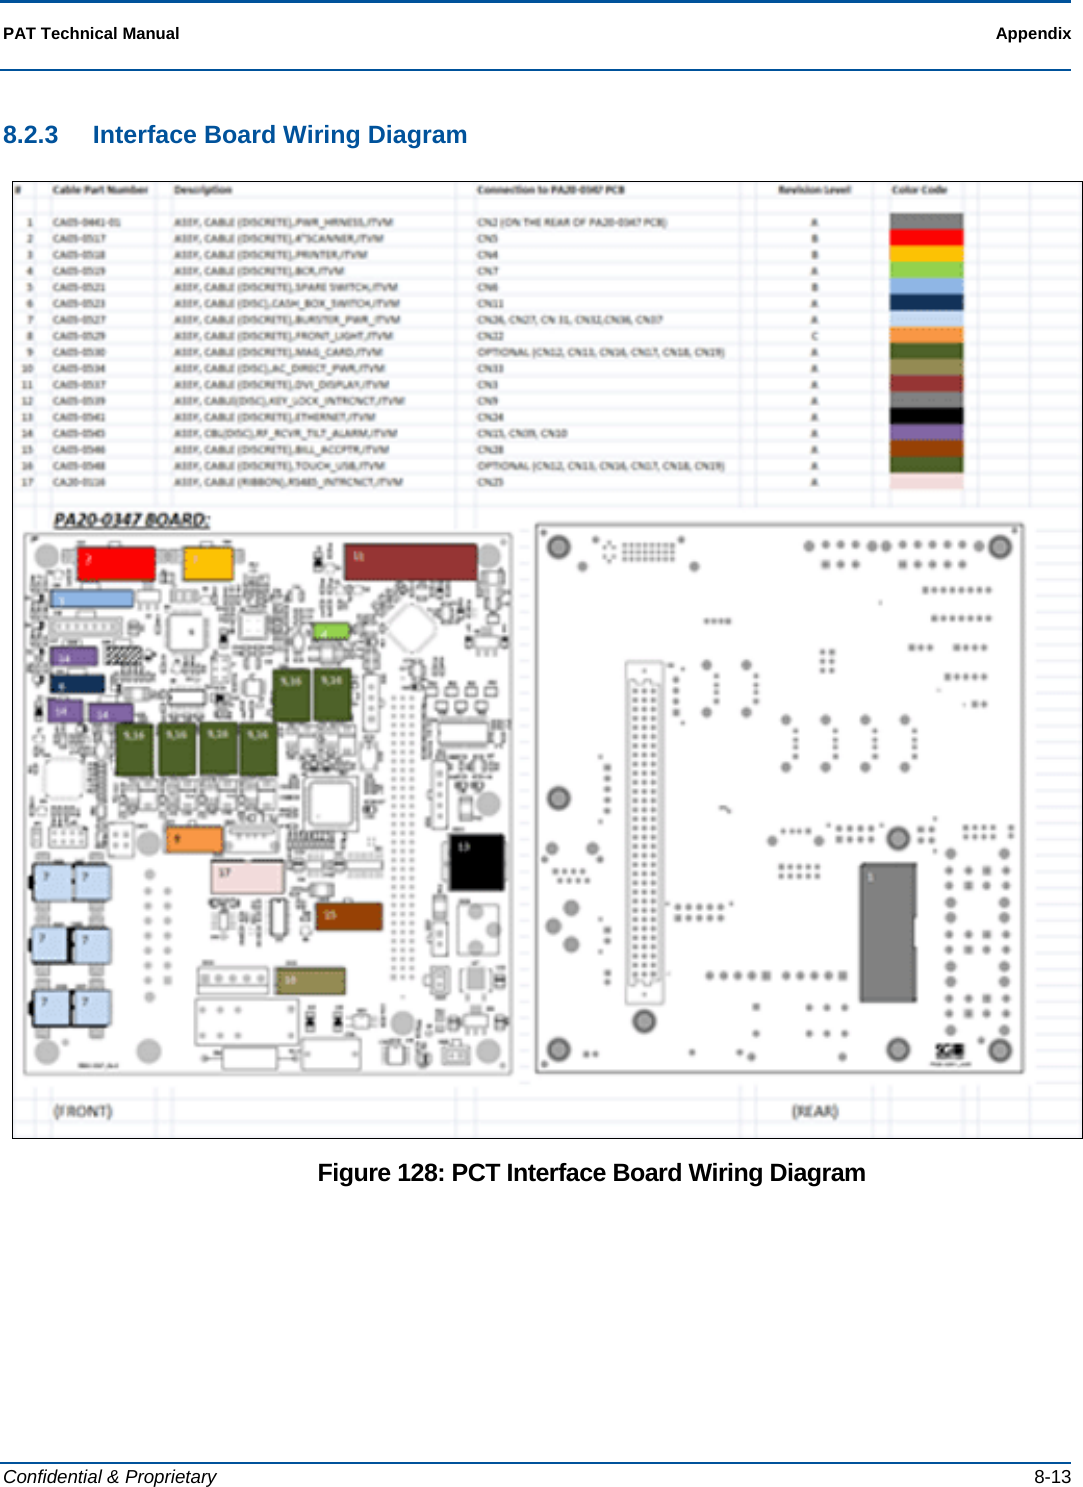  PAT Technical Manual    Appendix  Confidential &amp; Proprietary   8-13 8.2.3  Interface Board Wiring Diagram  Figure 128: PCT Interface Board Wiring Diagram  